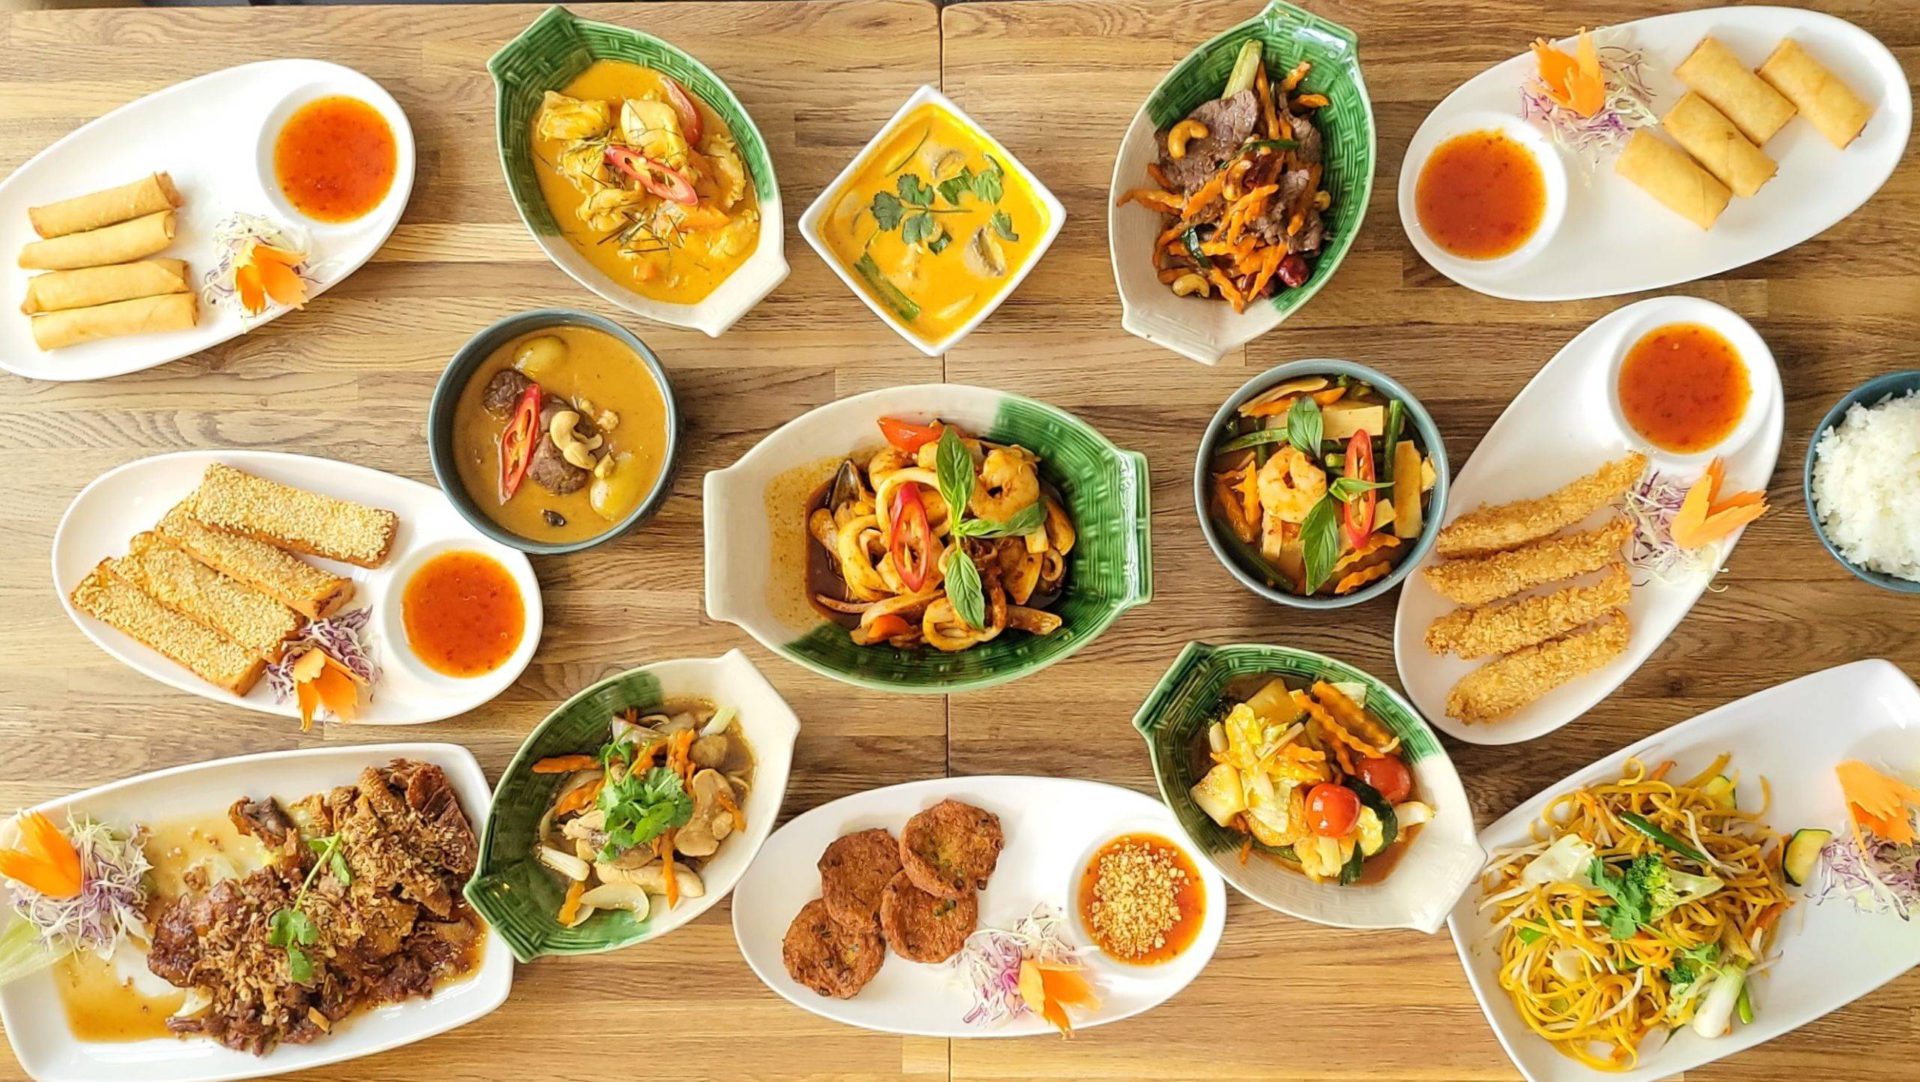 Table with selection of dishes from One Thai Restaurant, showing curries, starters and stir fries, including tempura prawns, fish cakes, Seafood stir fry and prawn on toast among 15 dishes.